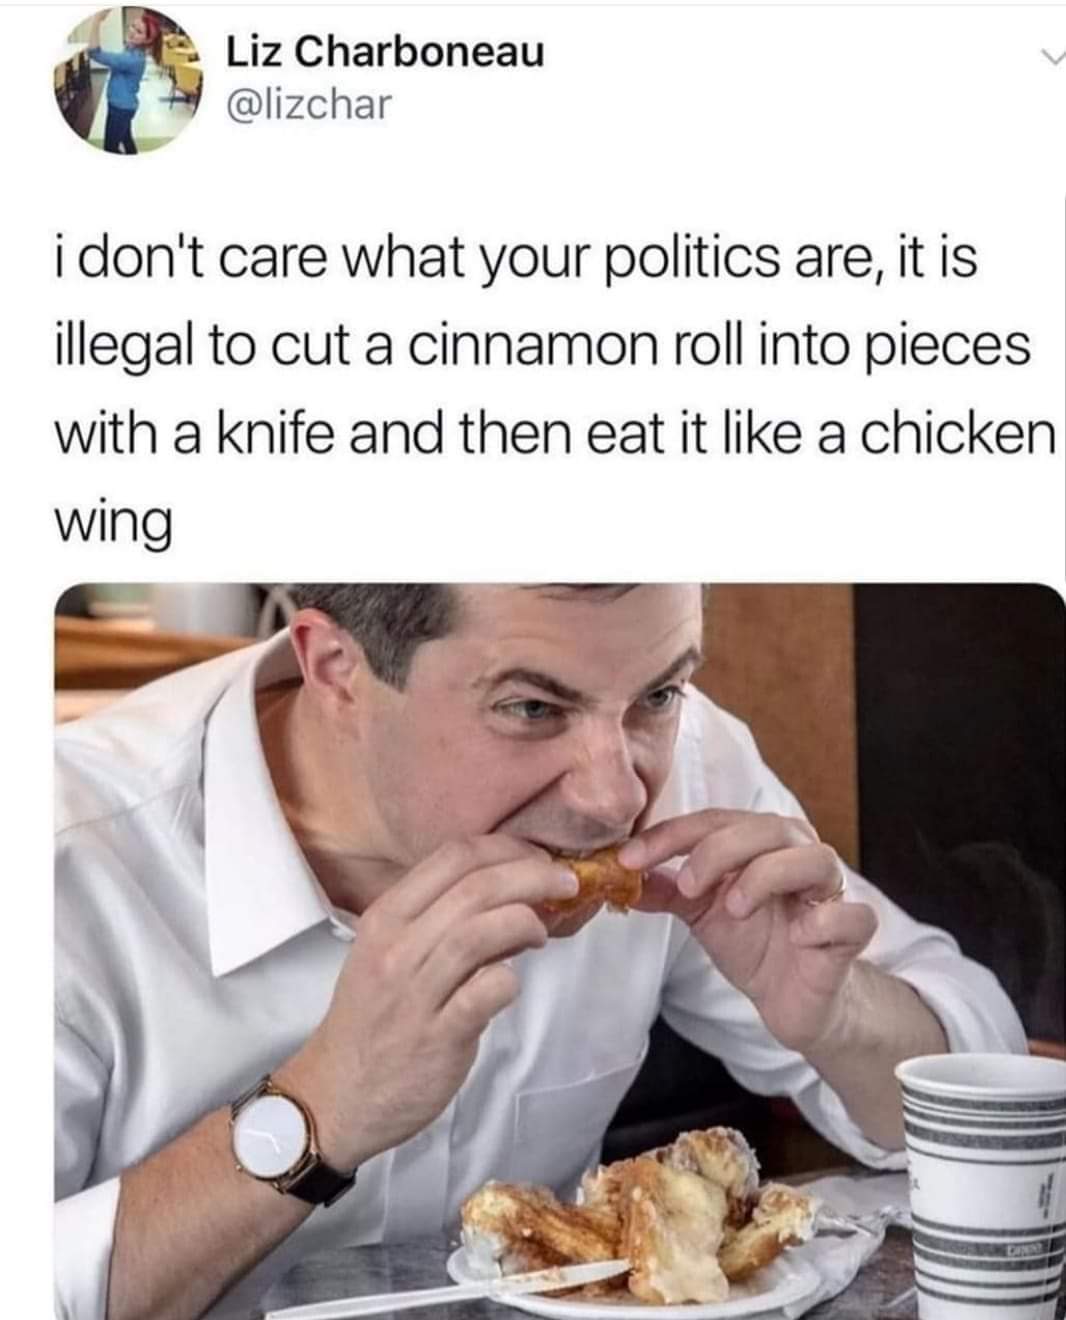 pete buttigieg cinnamon roll - Liz Charboneau i don't care what your politics are, it is illegal to cut a cinnamon roll into pieces with a knife and then eat it a chicken wing